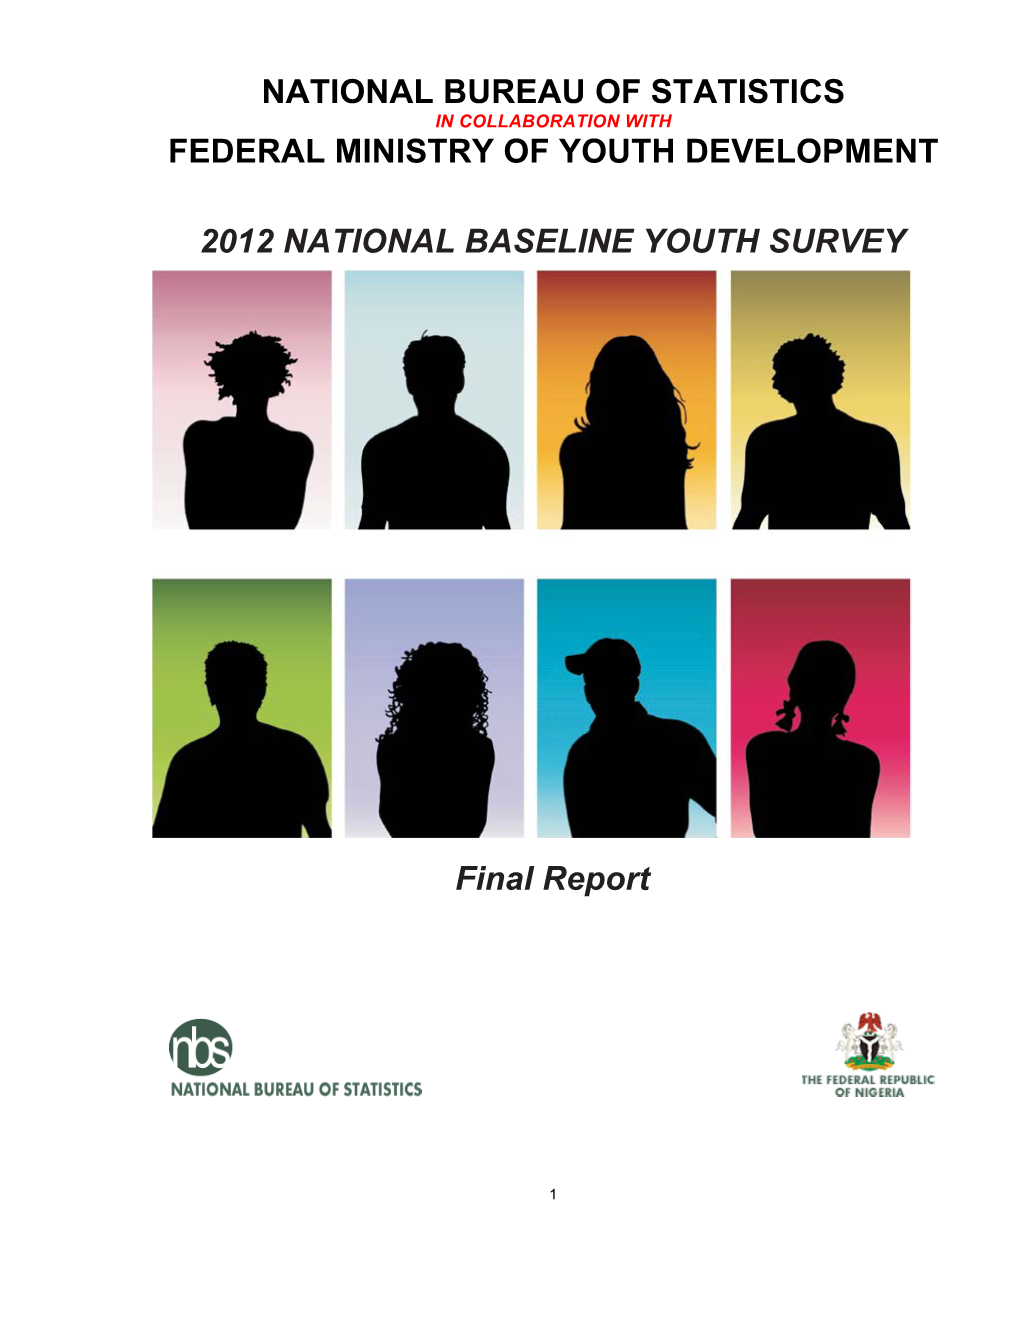 NBS-FMYD Youth Survey Report